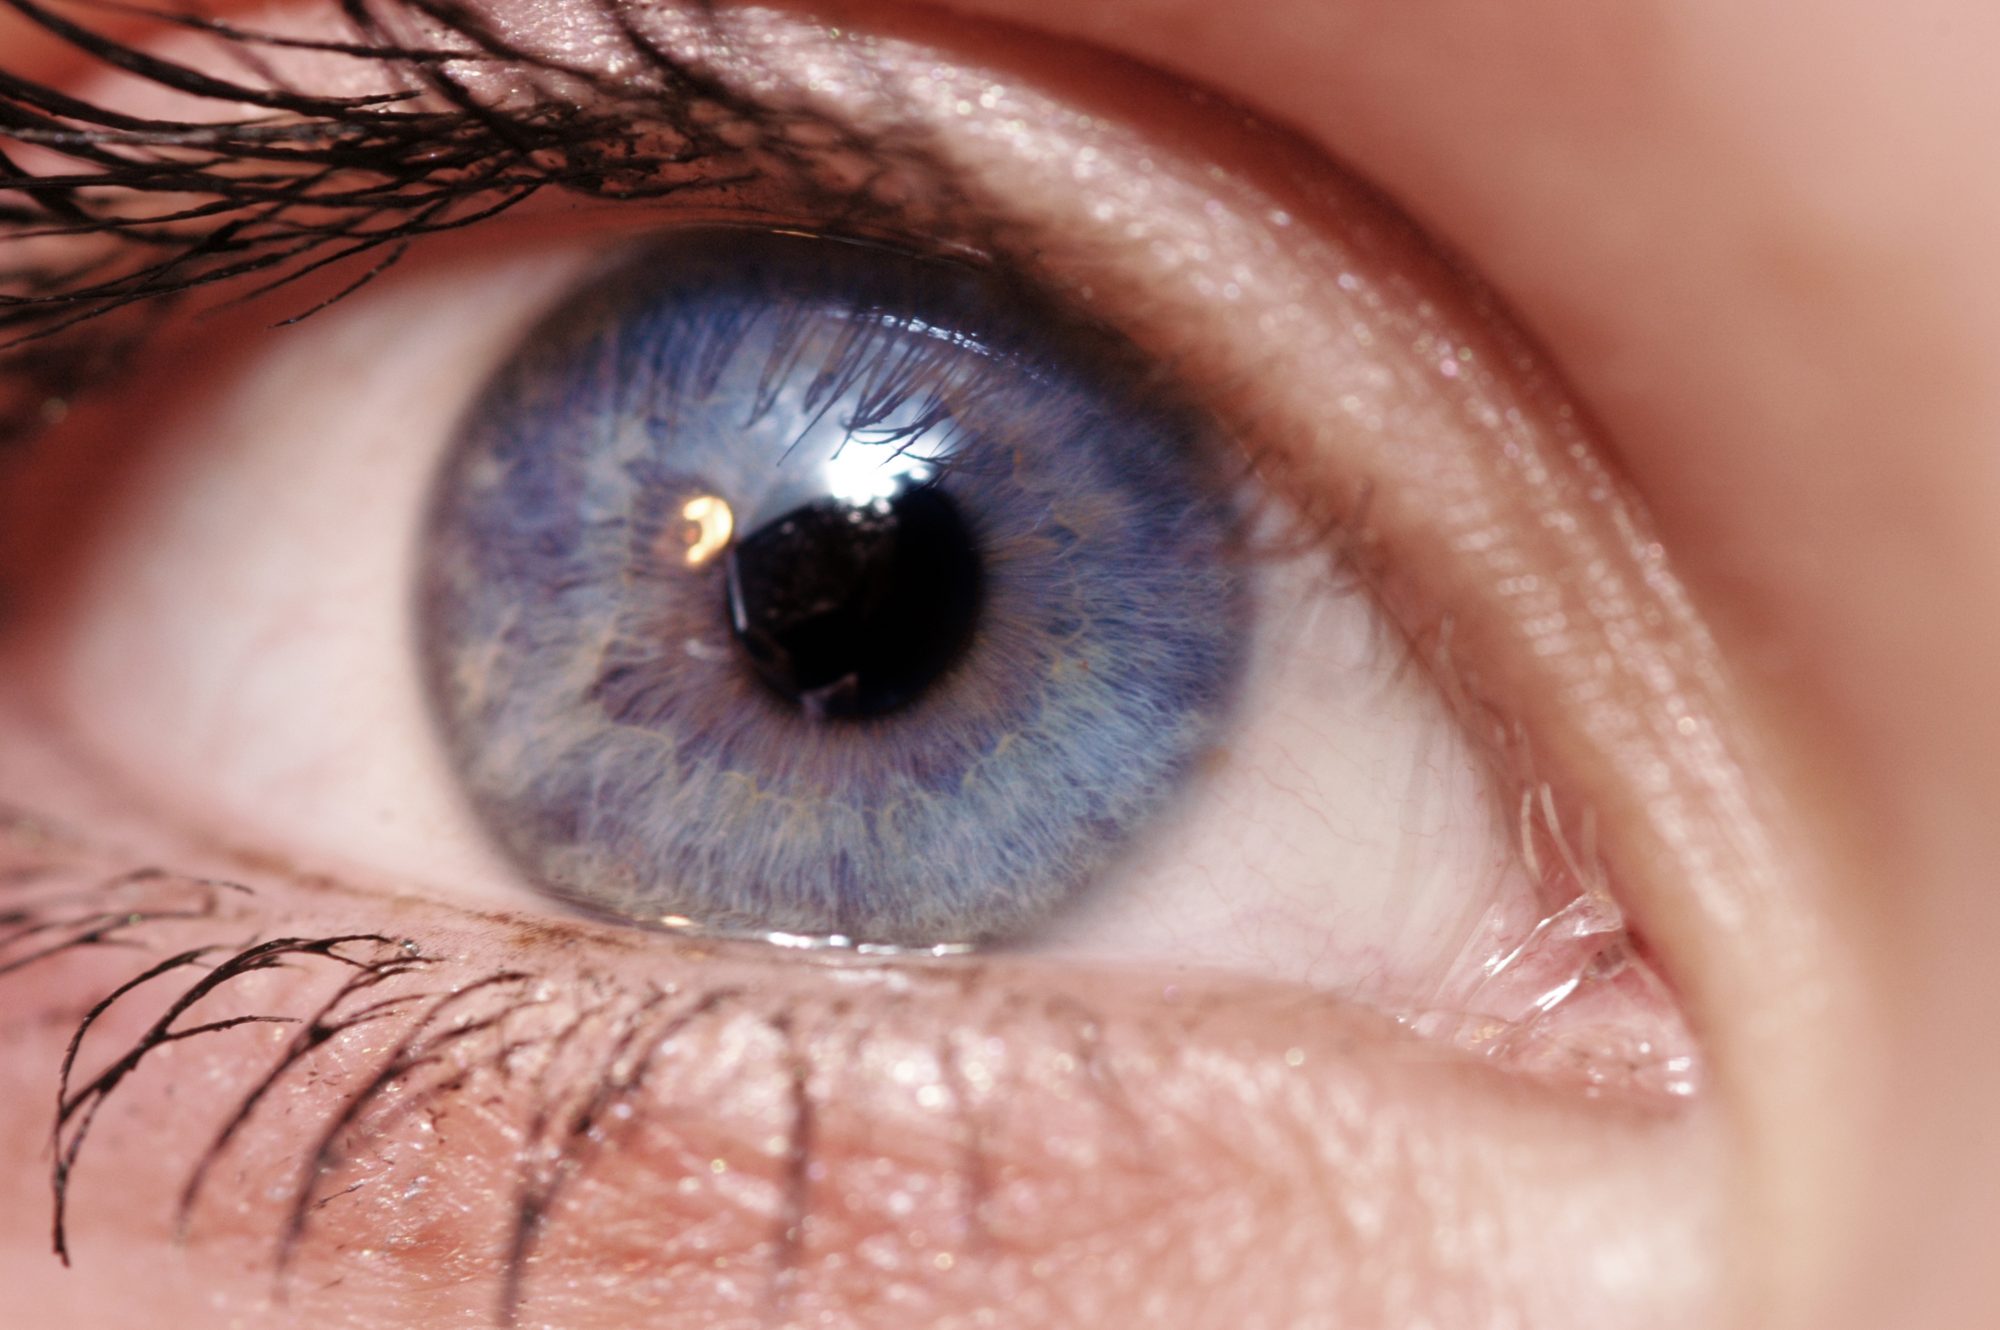 All blue eyes descend from a single common ancestor who lived